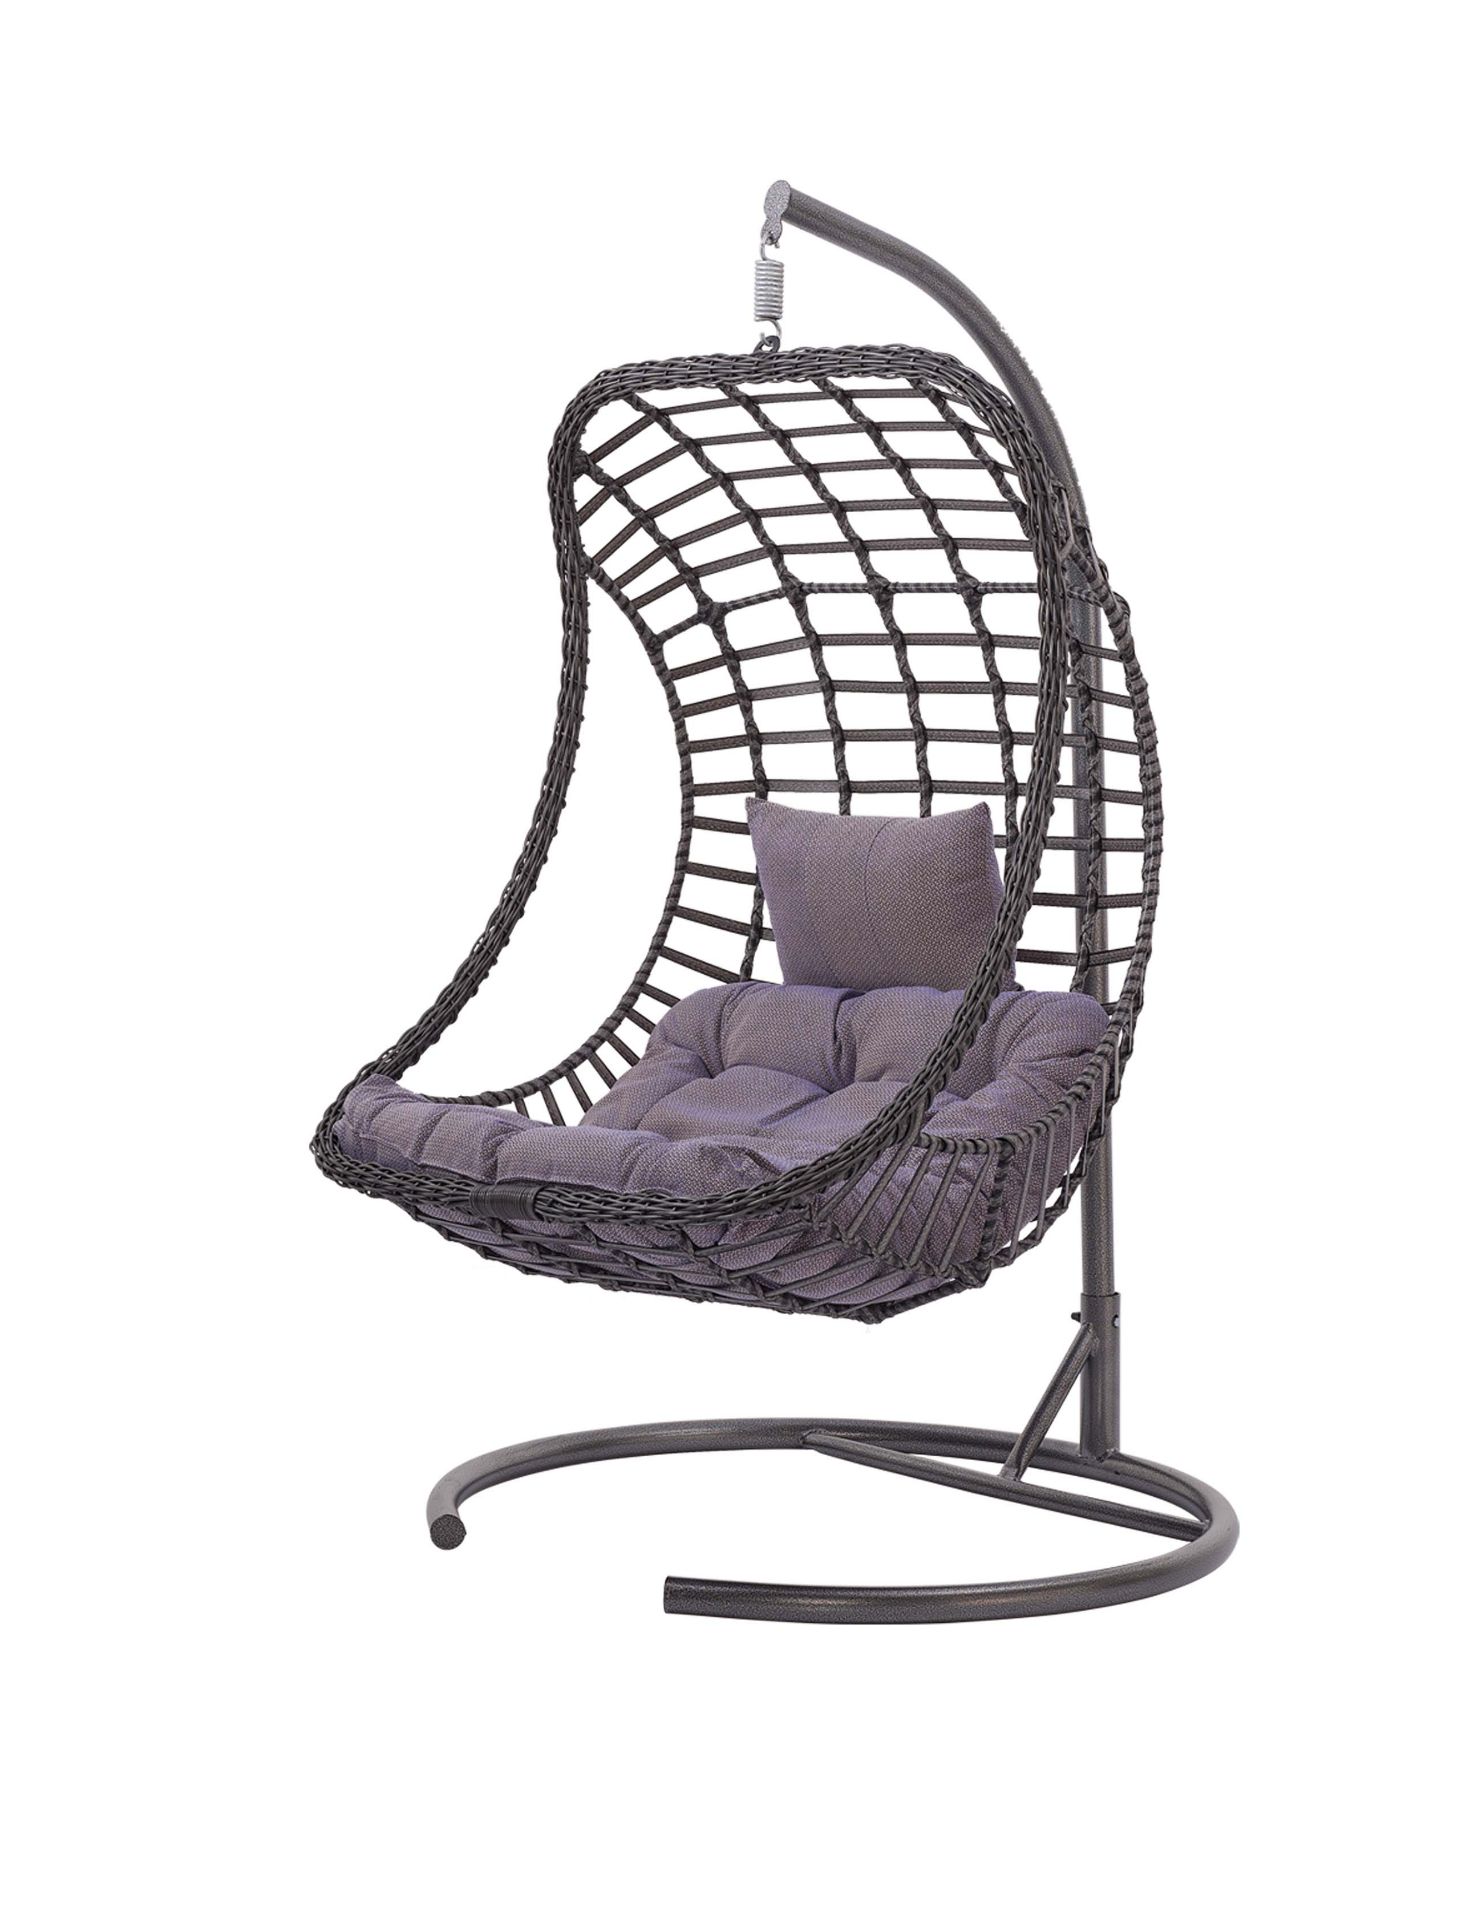 + VAT Brand New Chelsea Garden Company Rattan Single Hanging Swing Chair - Item Is Available Approx - Image 2 of 2